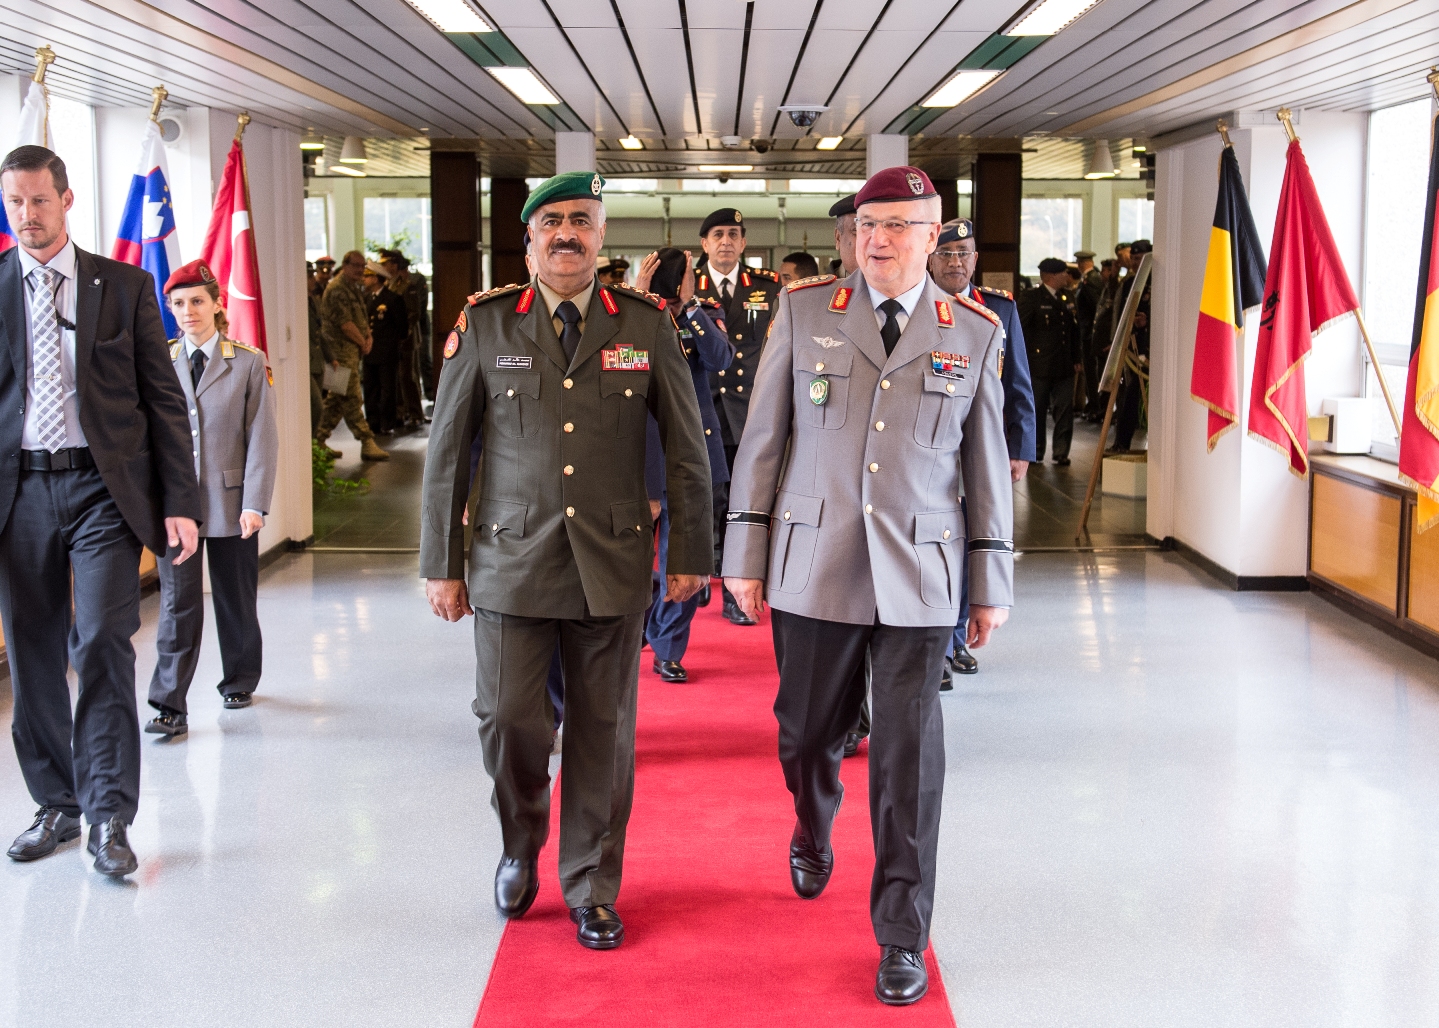 Kuwait Chief of Staff Lieutenant General Mohammad Al-Khoder meets with Chief of Staff of the Supreme Headquarters Allied Powers Europe (SHAPE) General Werner Freers